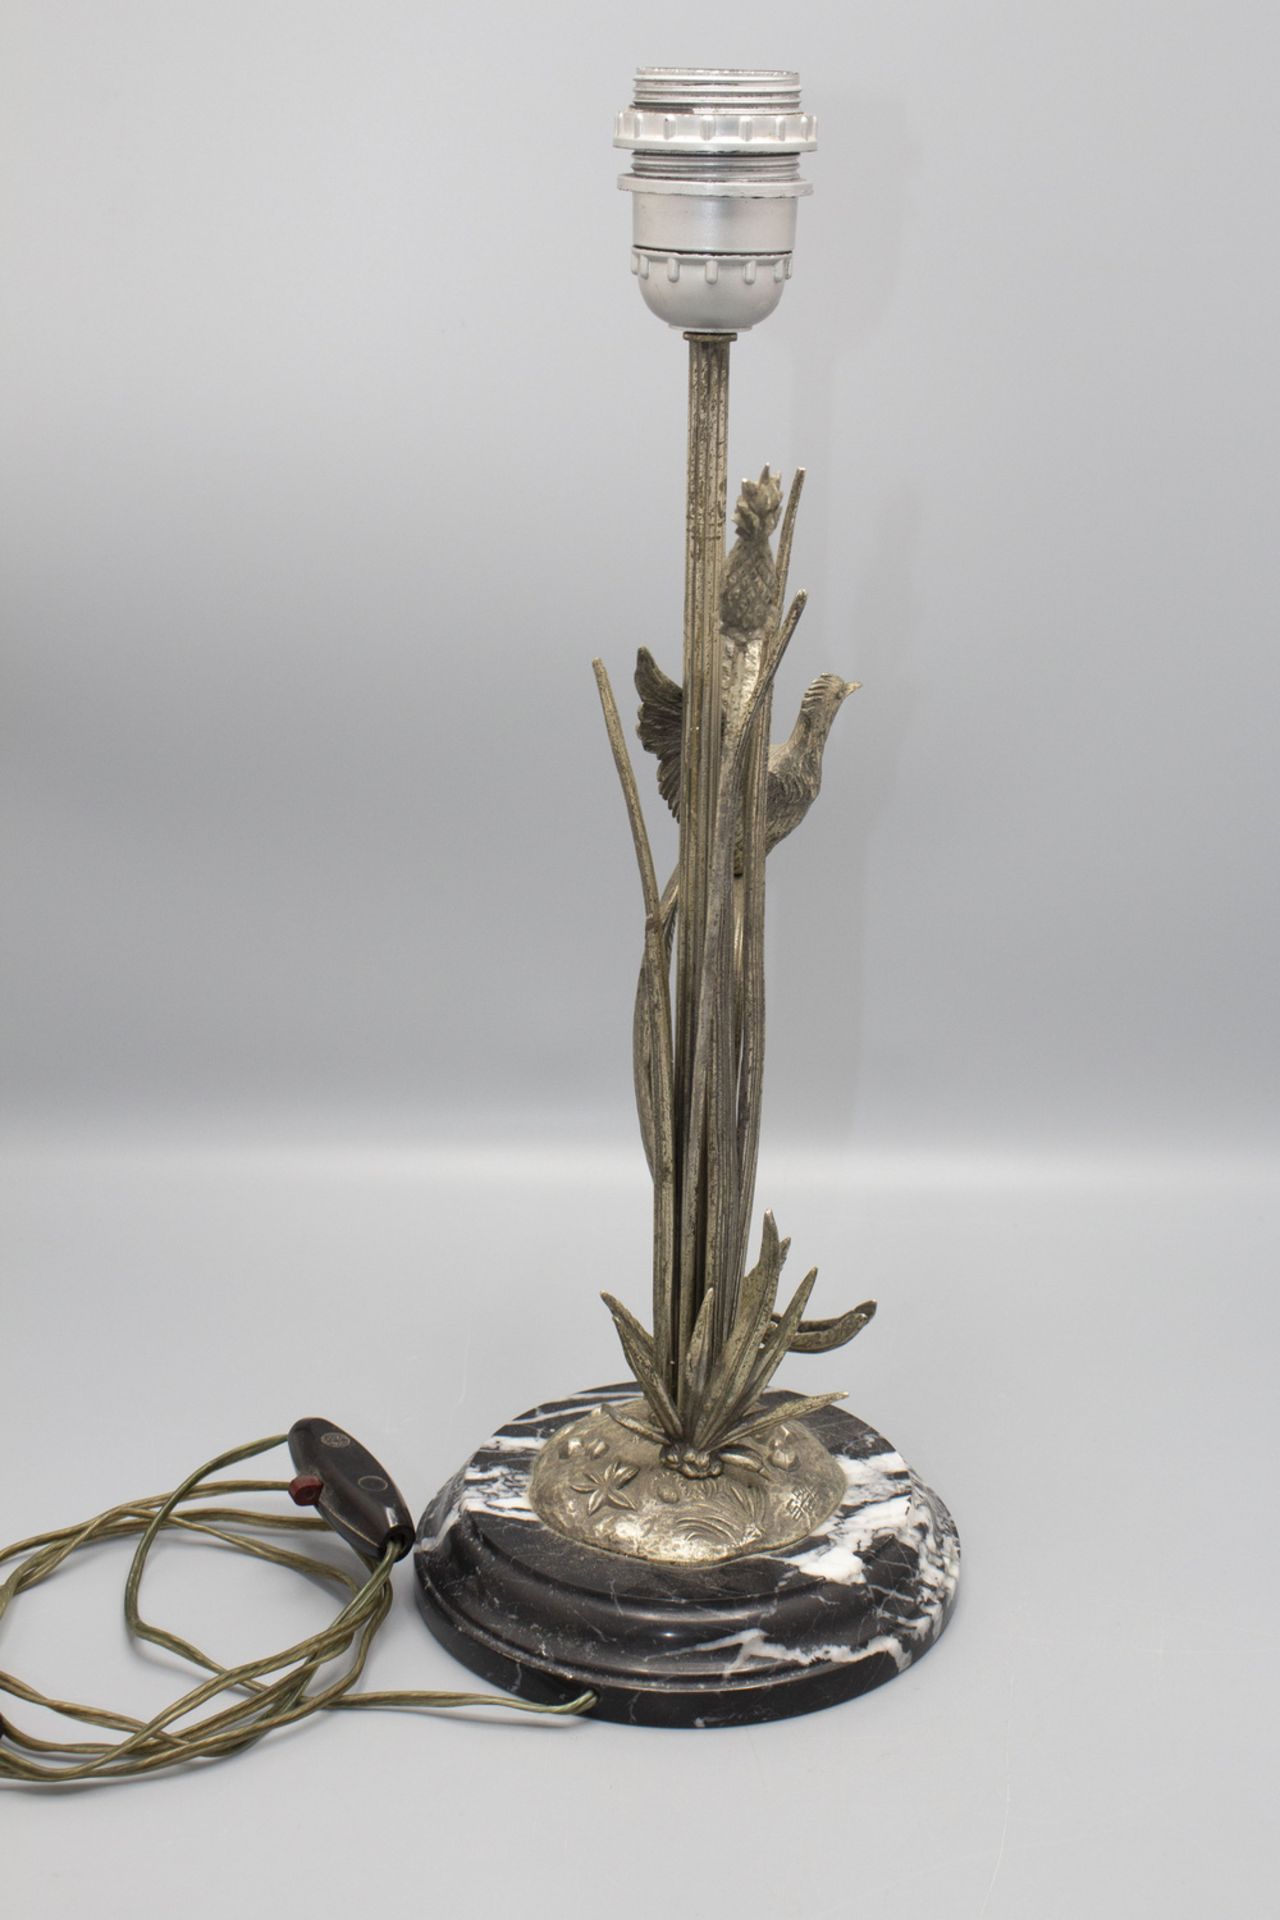 Tischlampe mit Schilf und Paradiesvogel / A desk lamp with reed and a bird of paradise, S. ... - Image 4 of 6